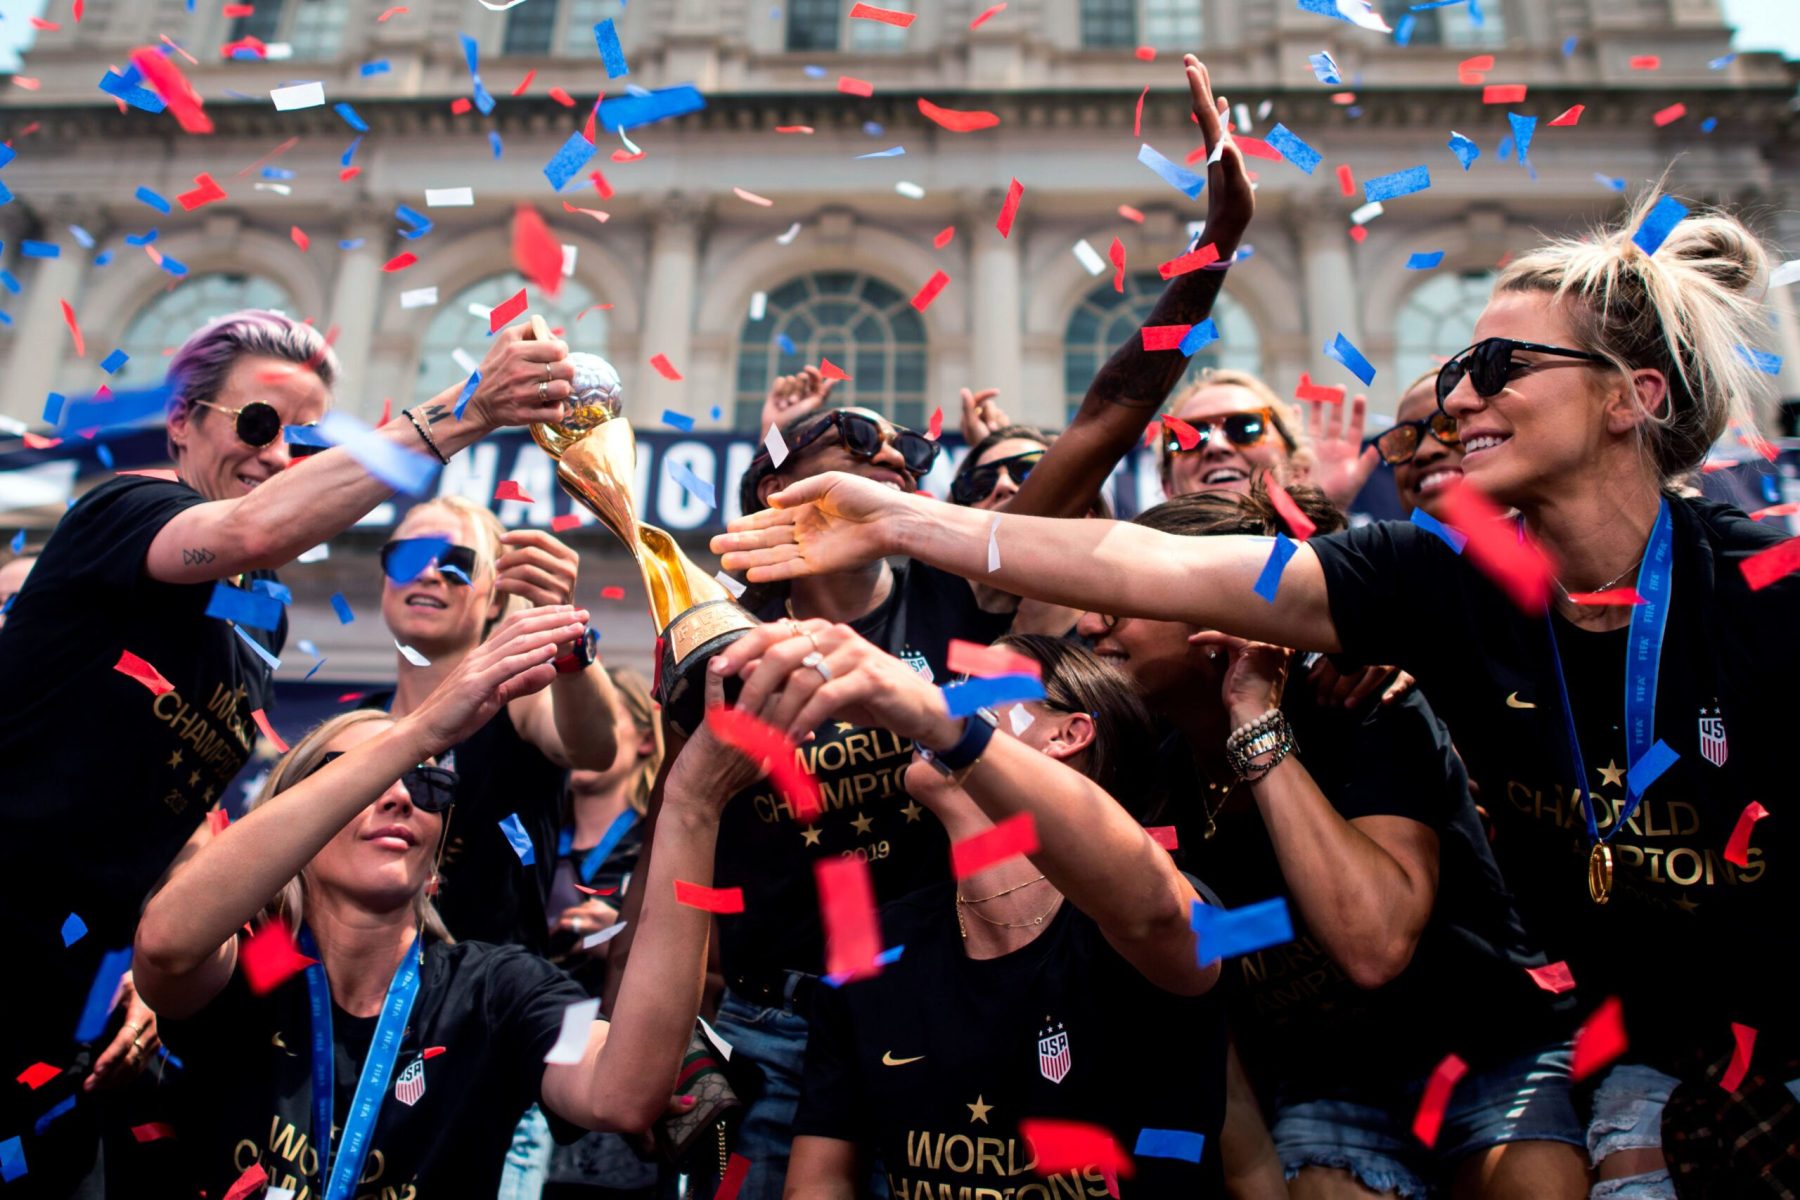 Players reach for the World Cup as confetti rains on them during a parade.